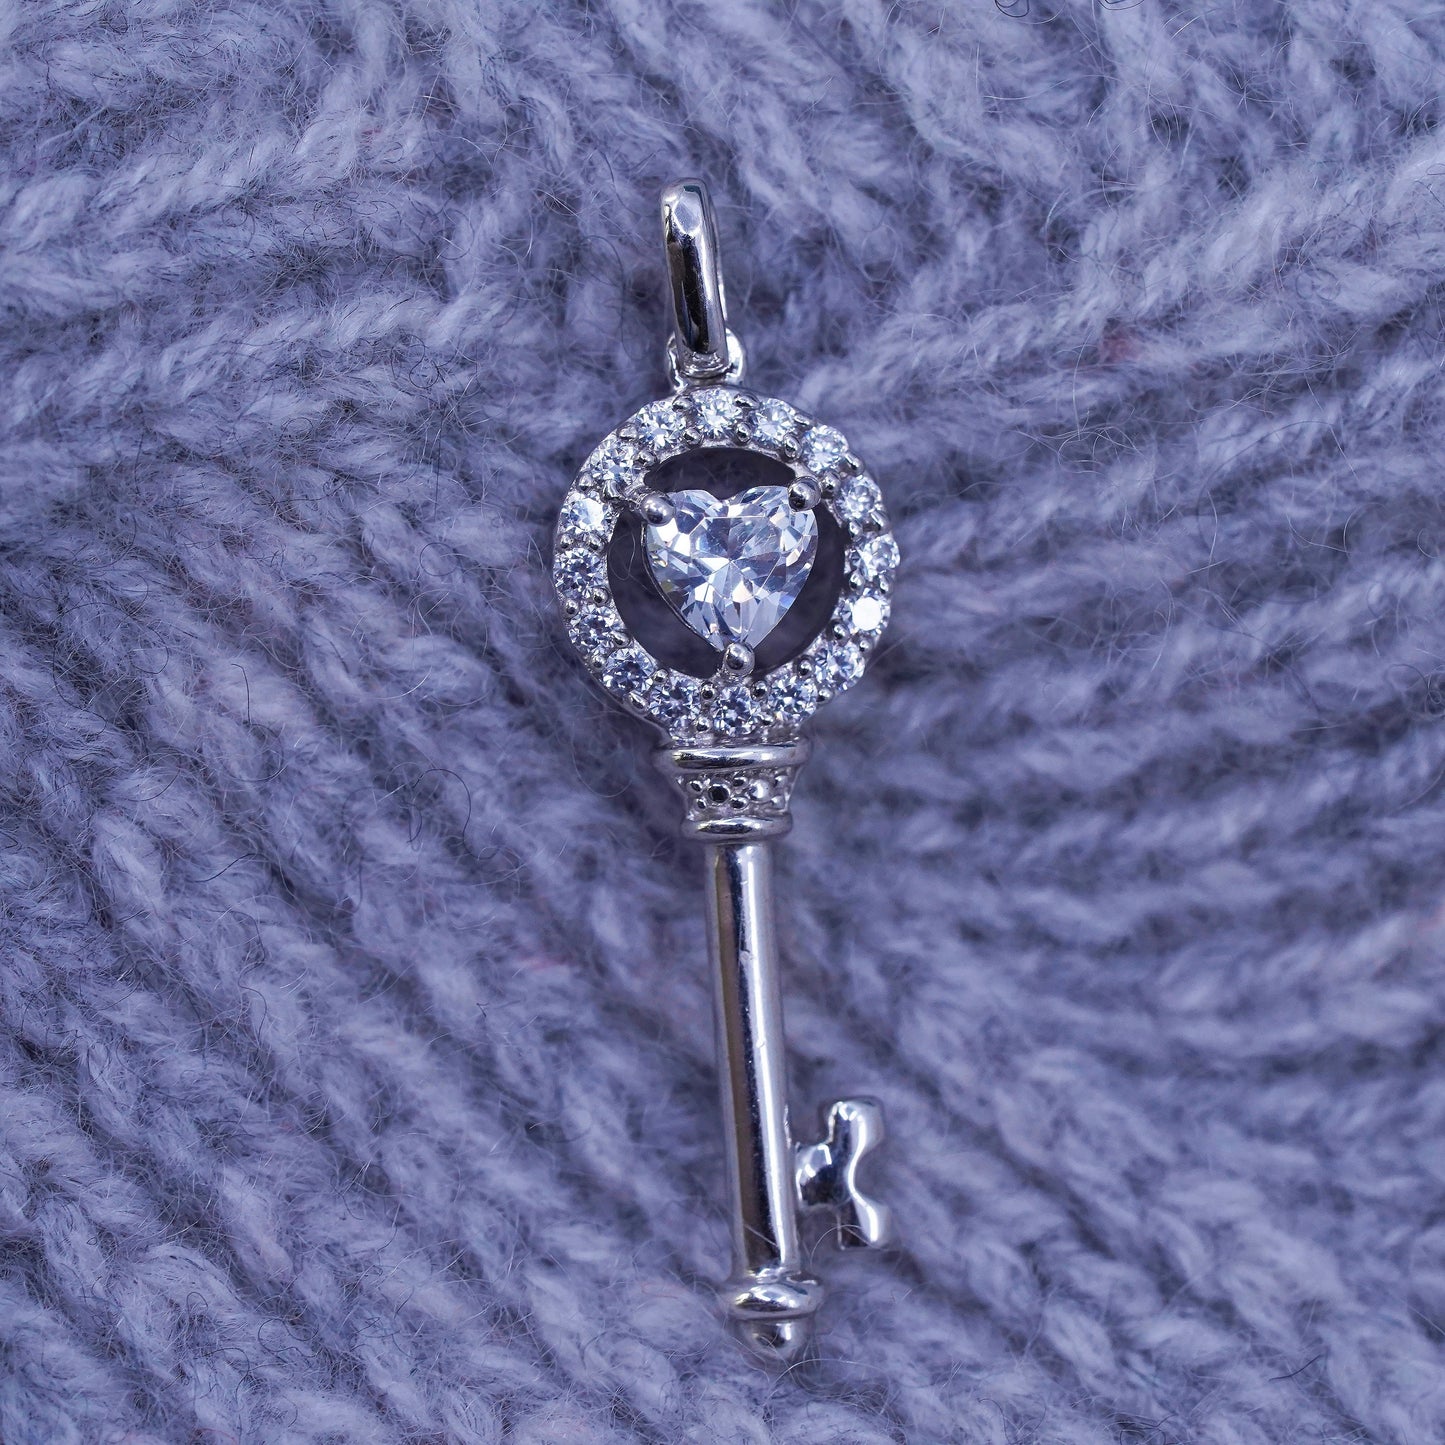 vintage Sterling silver handmade pendant, 925 key charm with cz